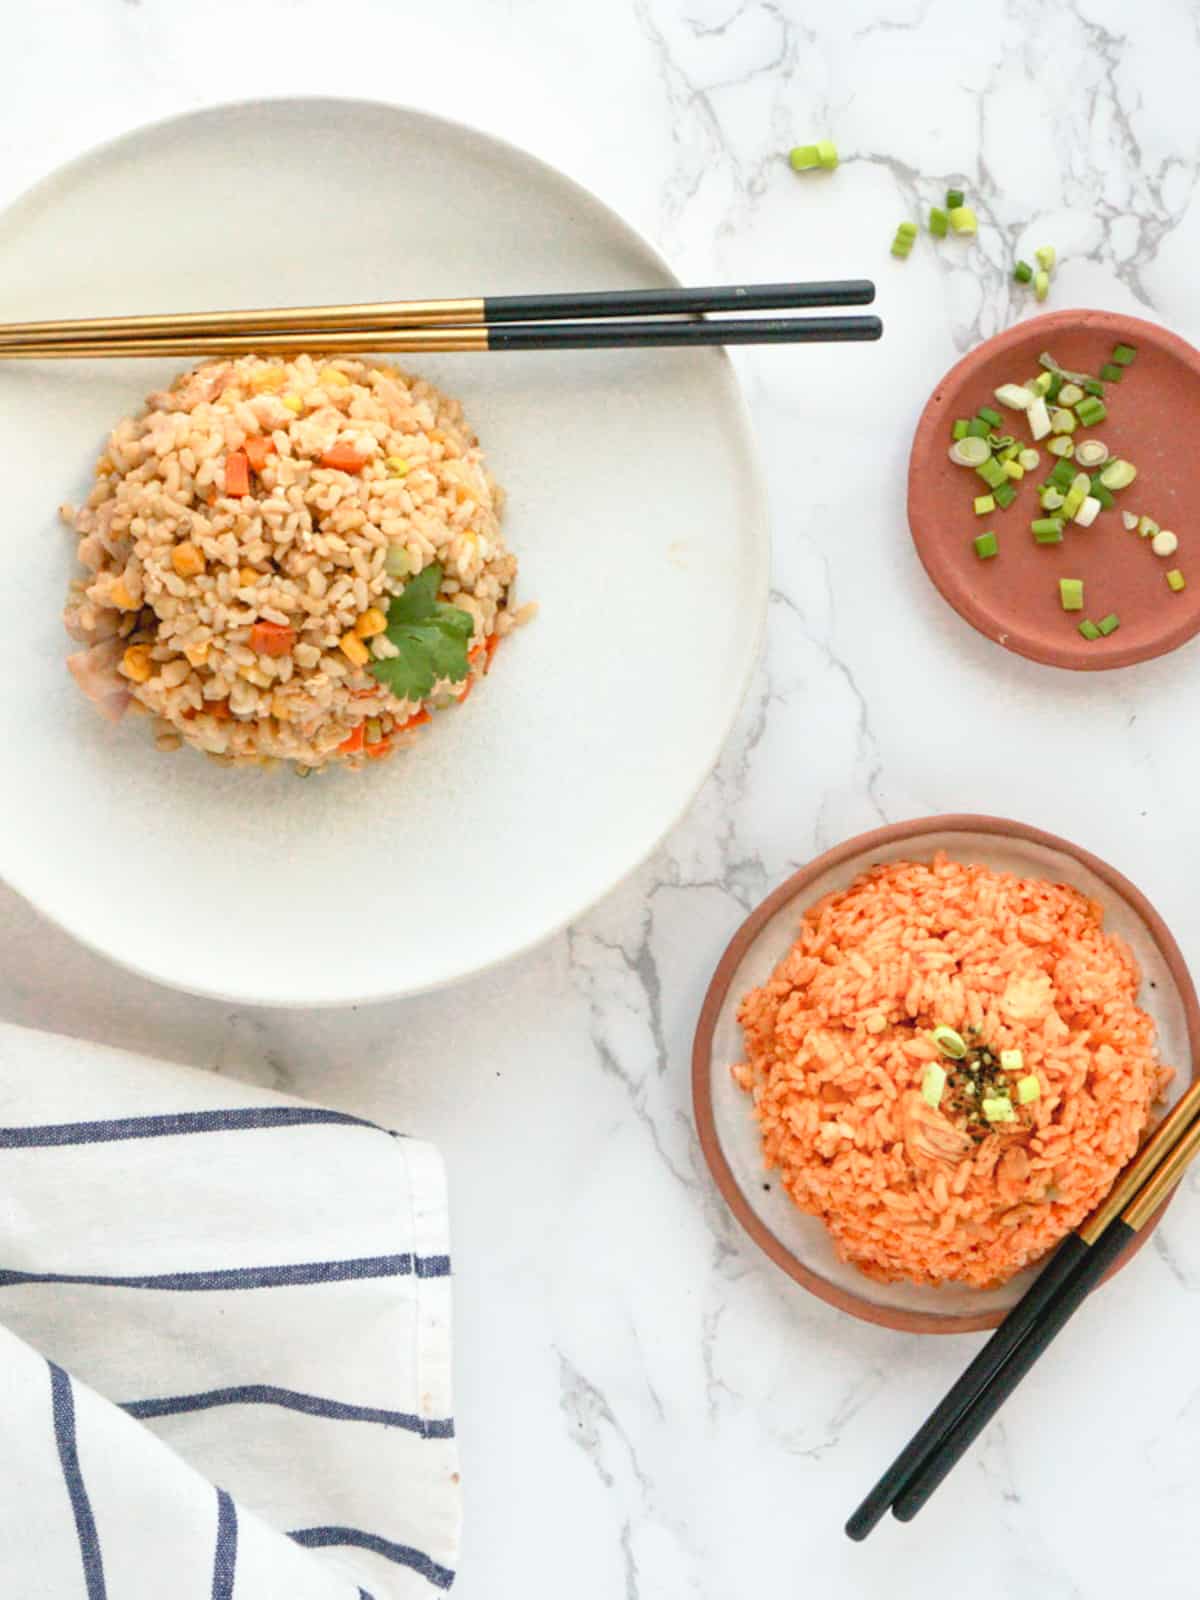 Overhead view of fried rice meal with chopsticks.